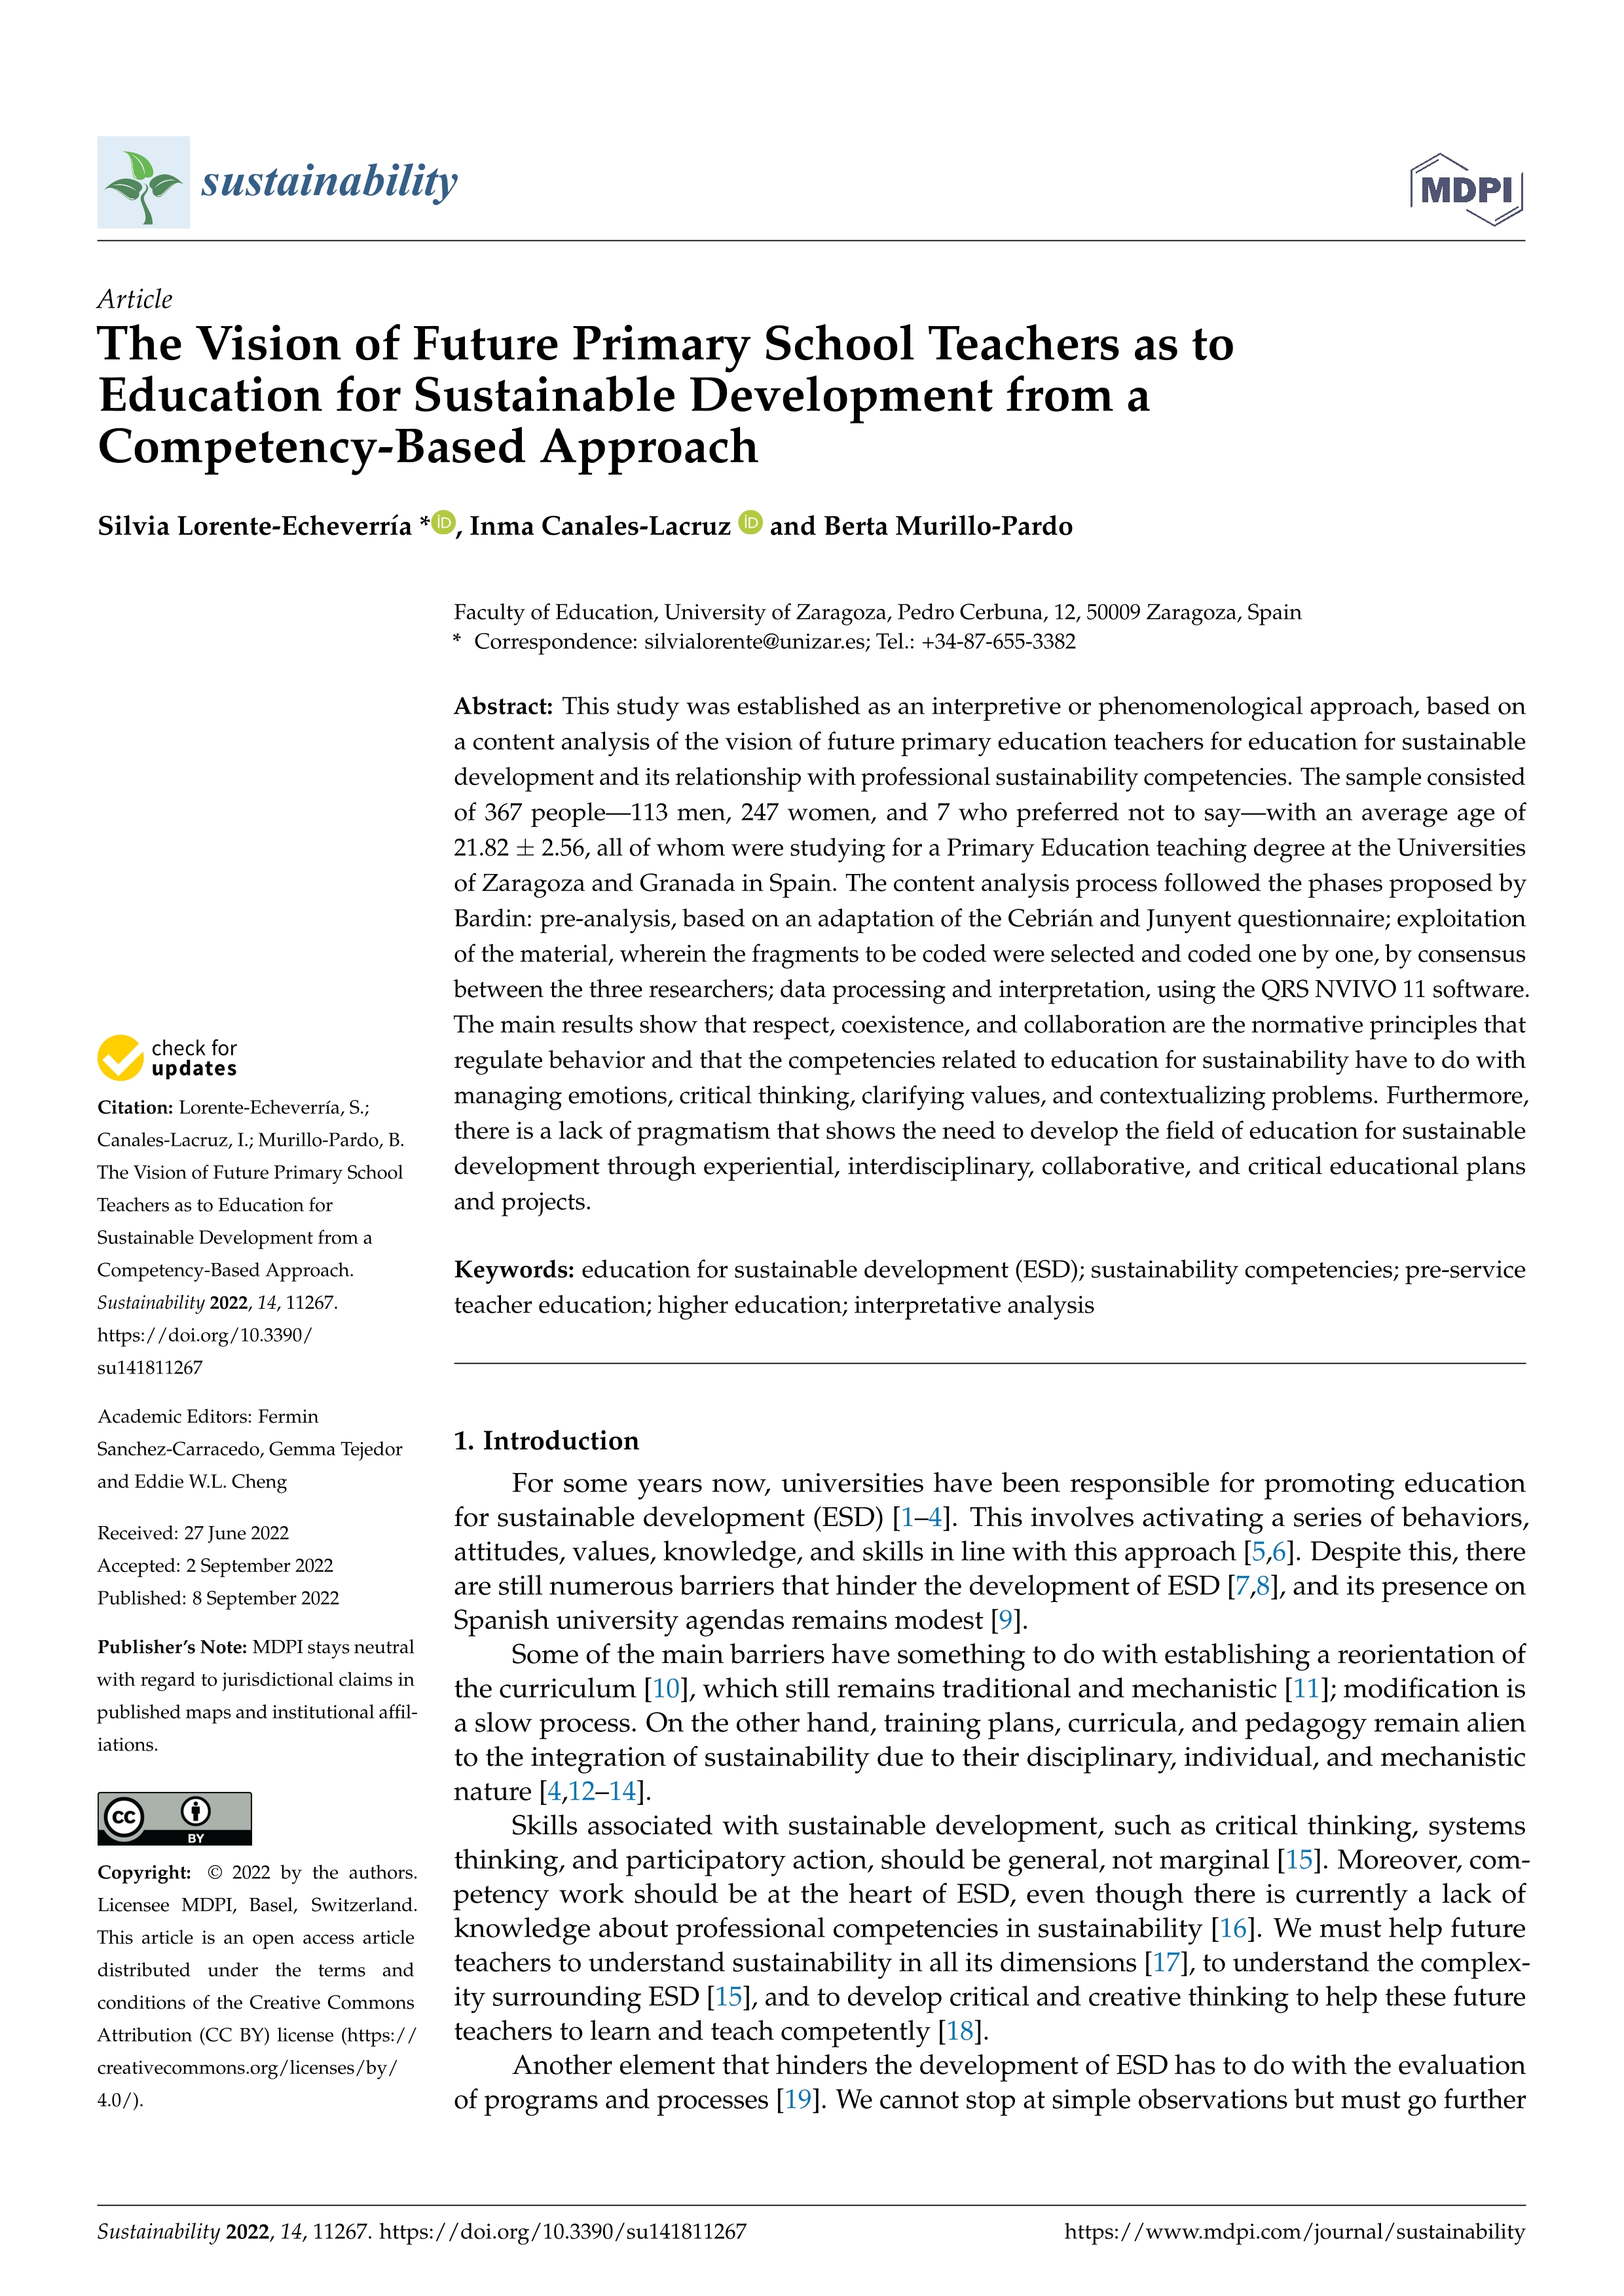 The Vision of Future Primary School Teachers as to Education for Sustainable Development from a Competency-Based Approach